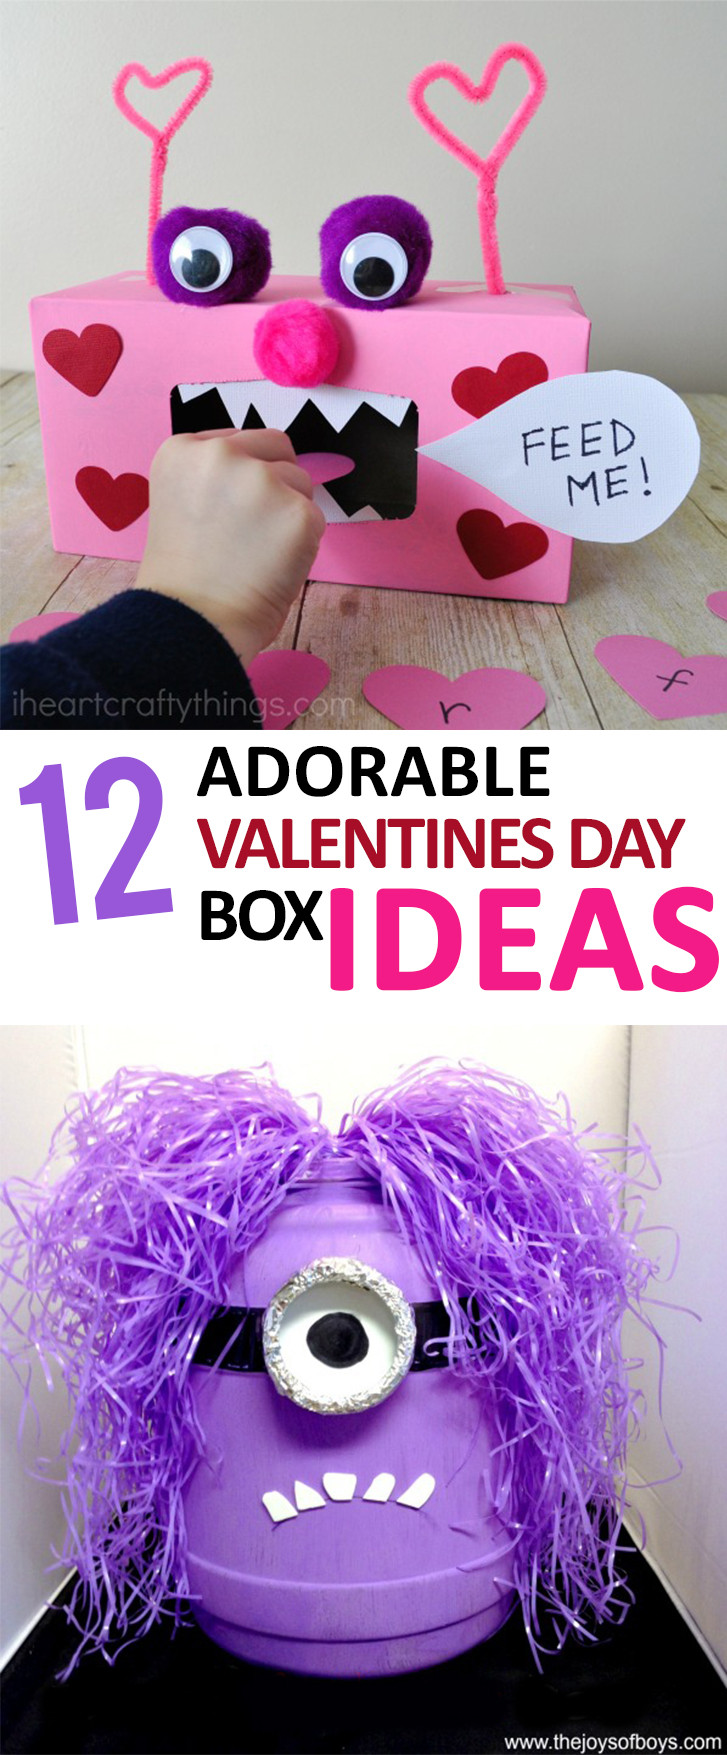 Cute Valentine Gift Ideas For Kids
 12 Adorable Valentines Day Box Ideas – Sunlit Spaces